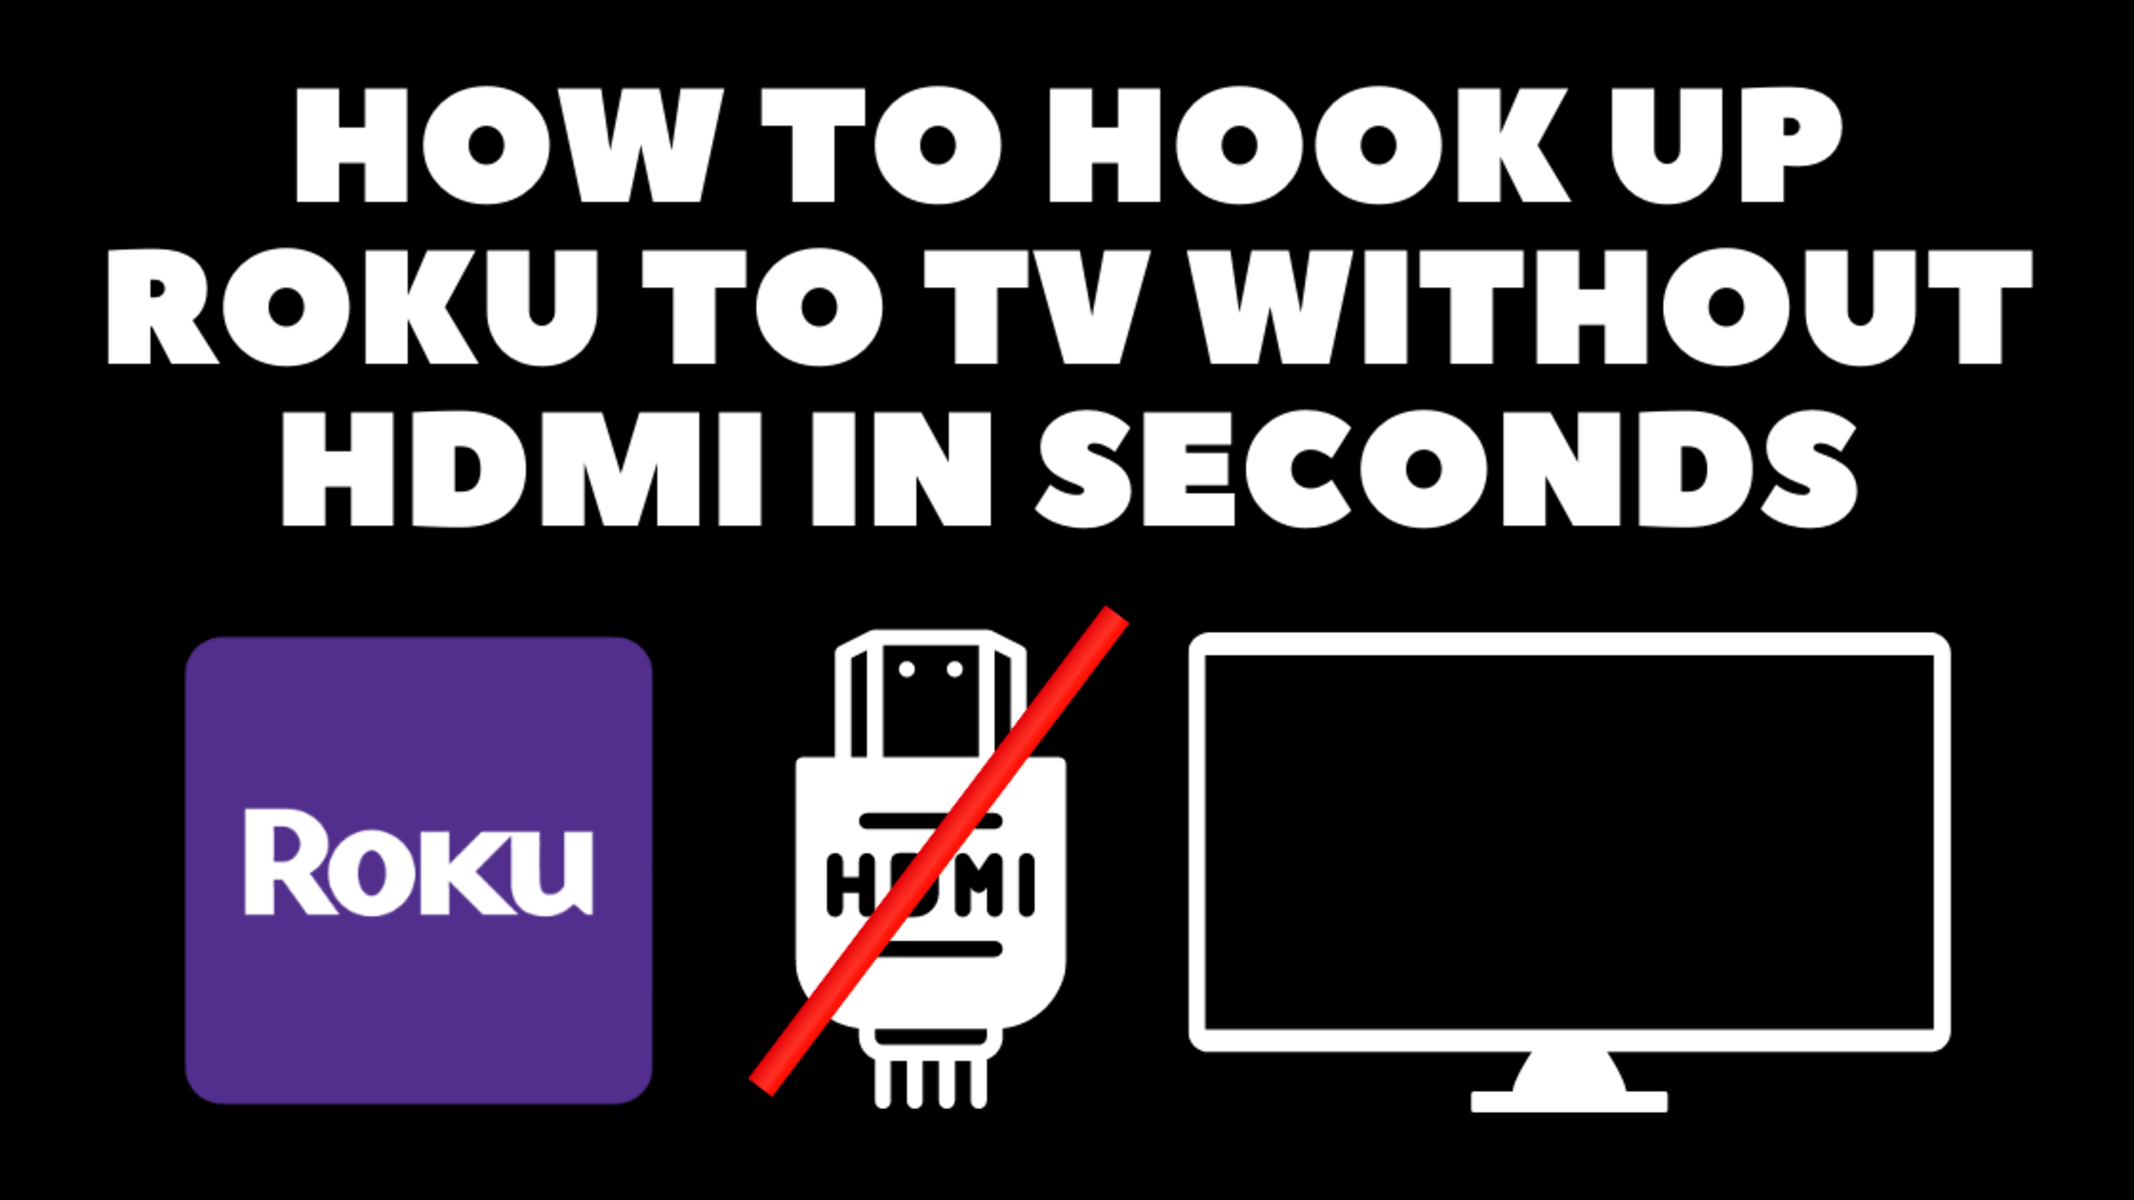 How To Hook Up Roku To Tv Without HDMI